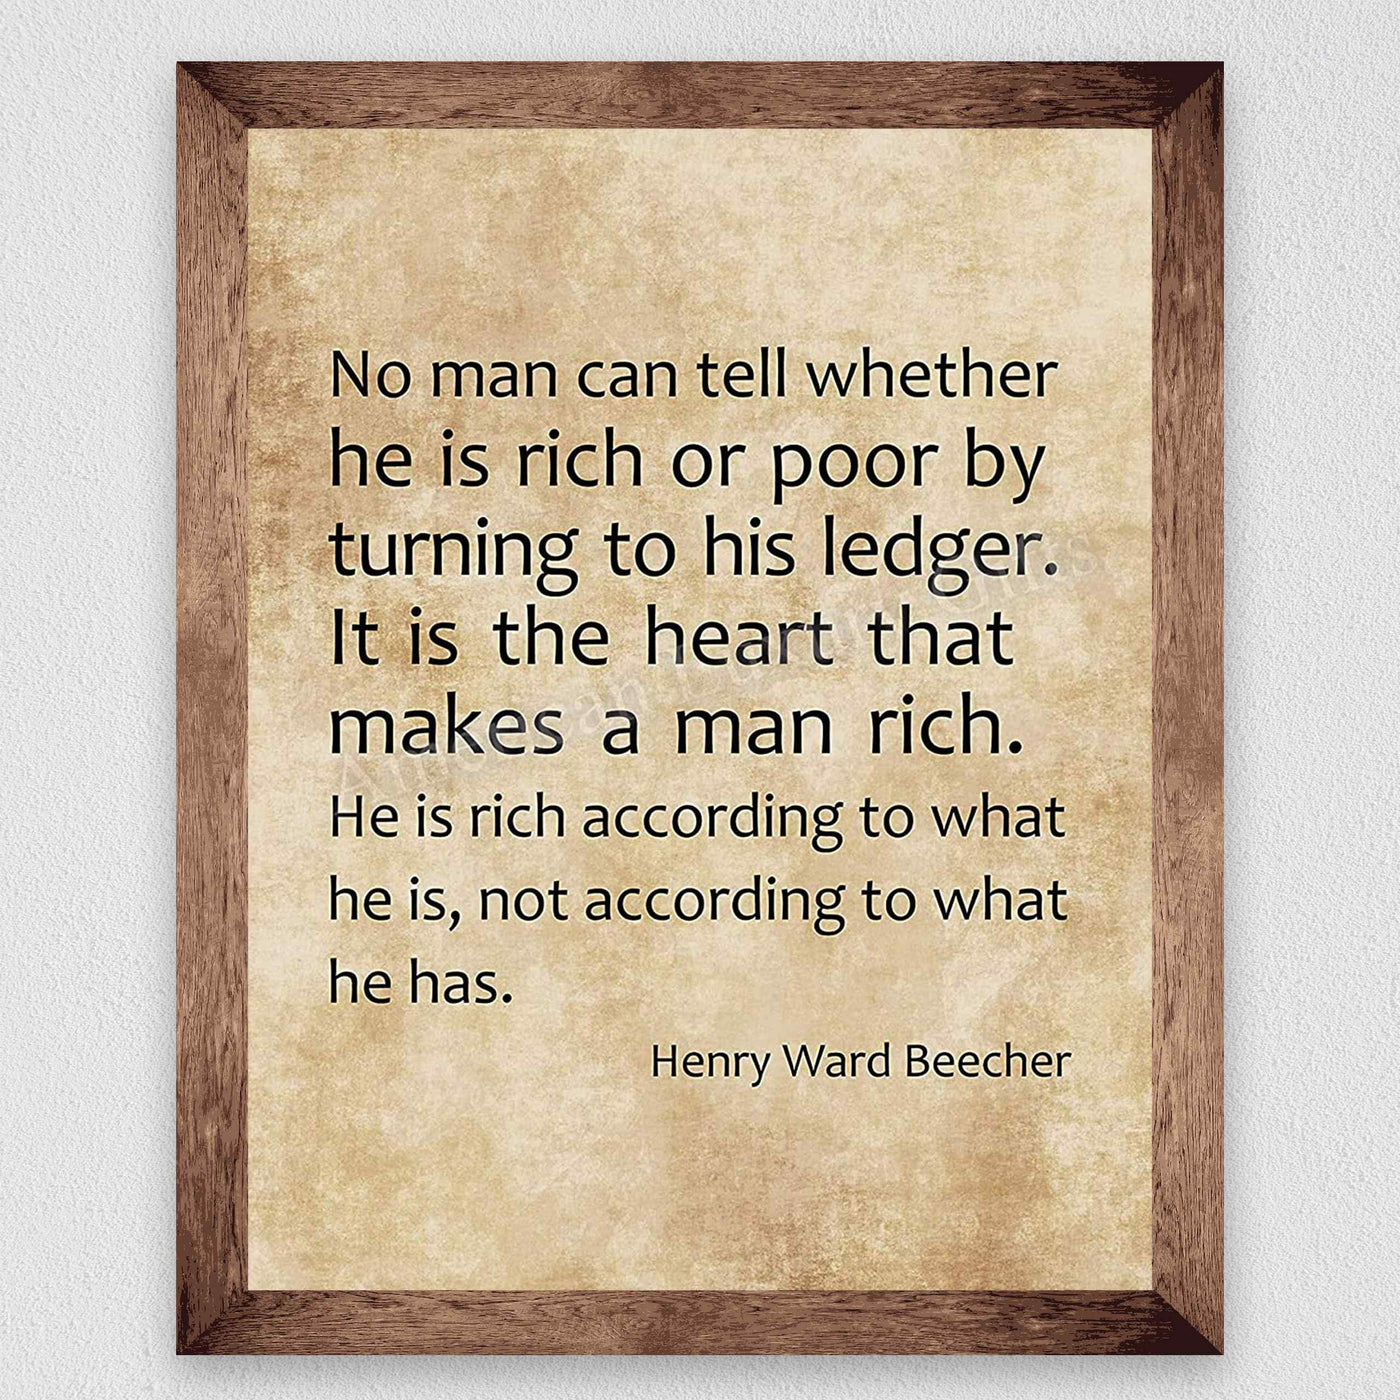 Henry Ward Beecher-"It Is the Heart That Makes a Man Rich" Inspirational Quotes Wall Art -8 x 10" Distressed Parchment Design Print-Ready to Frame. Perfect Home-Office-School-Study-Church Decor!